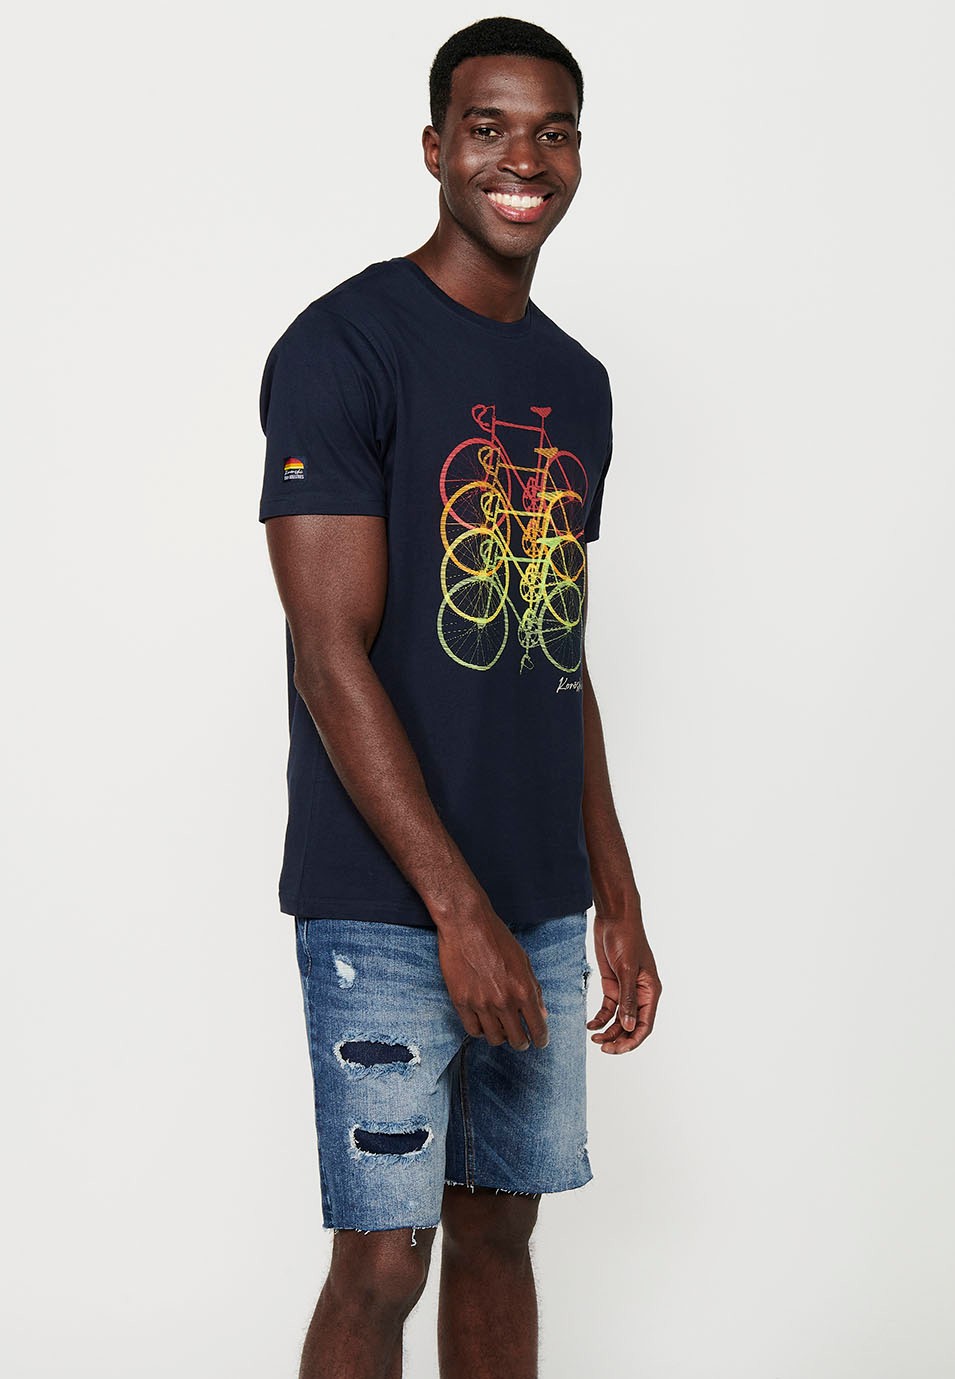 Short-sleeved cotton T-shirt with bicycle front print, navy color for men 1